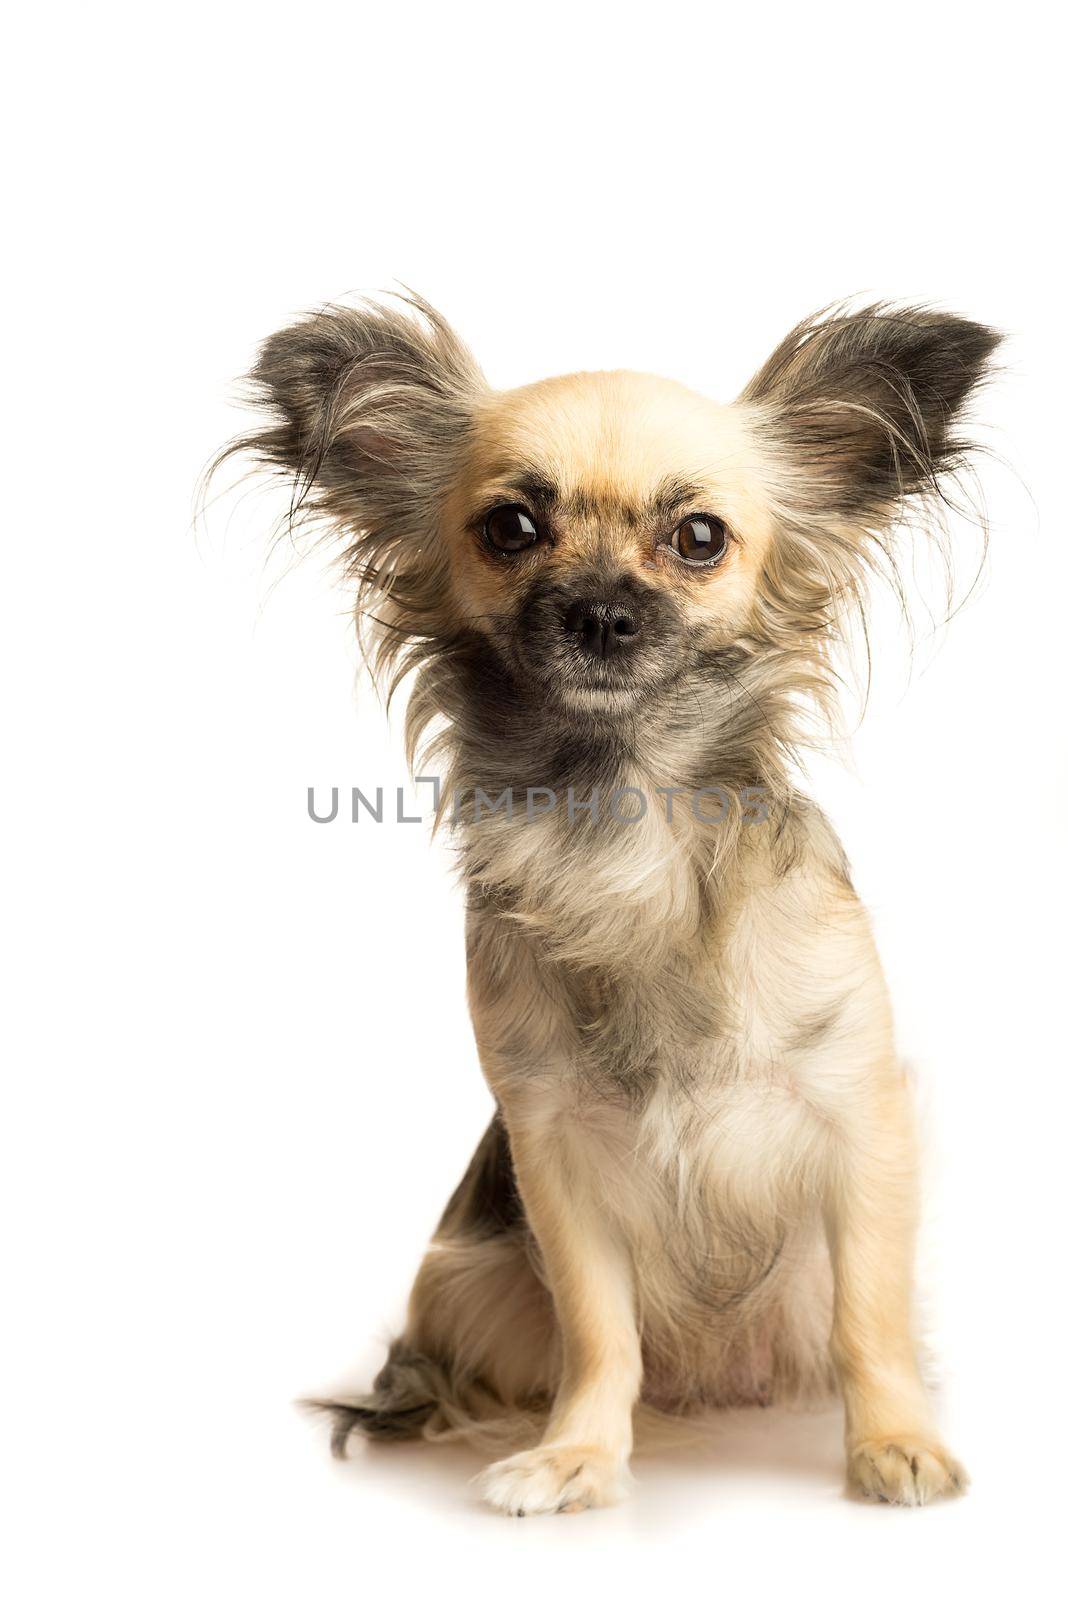 Cute little chihuahua long haired with butterfly ears isolated in white background by LeoniekvanderVliet